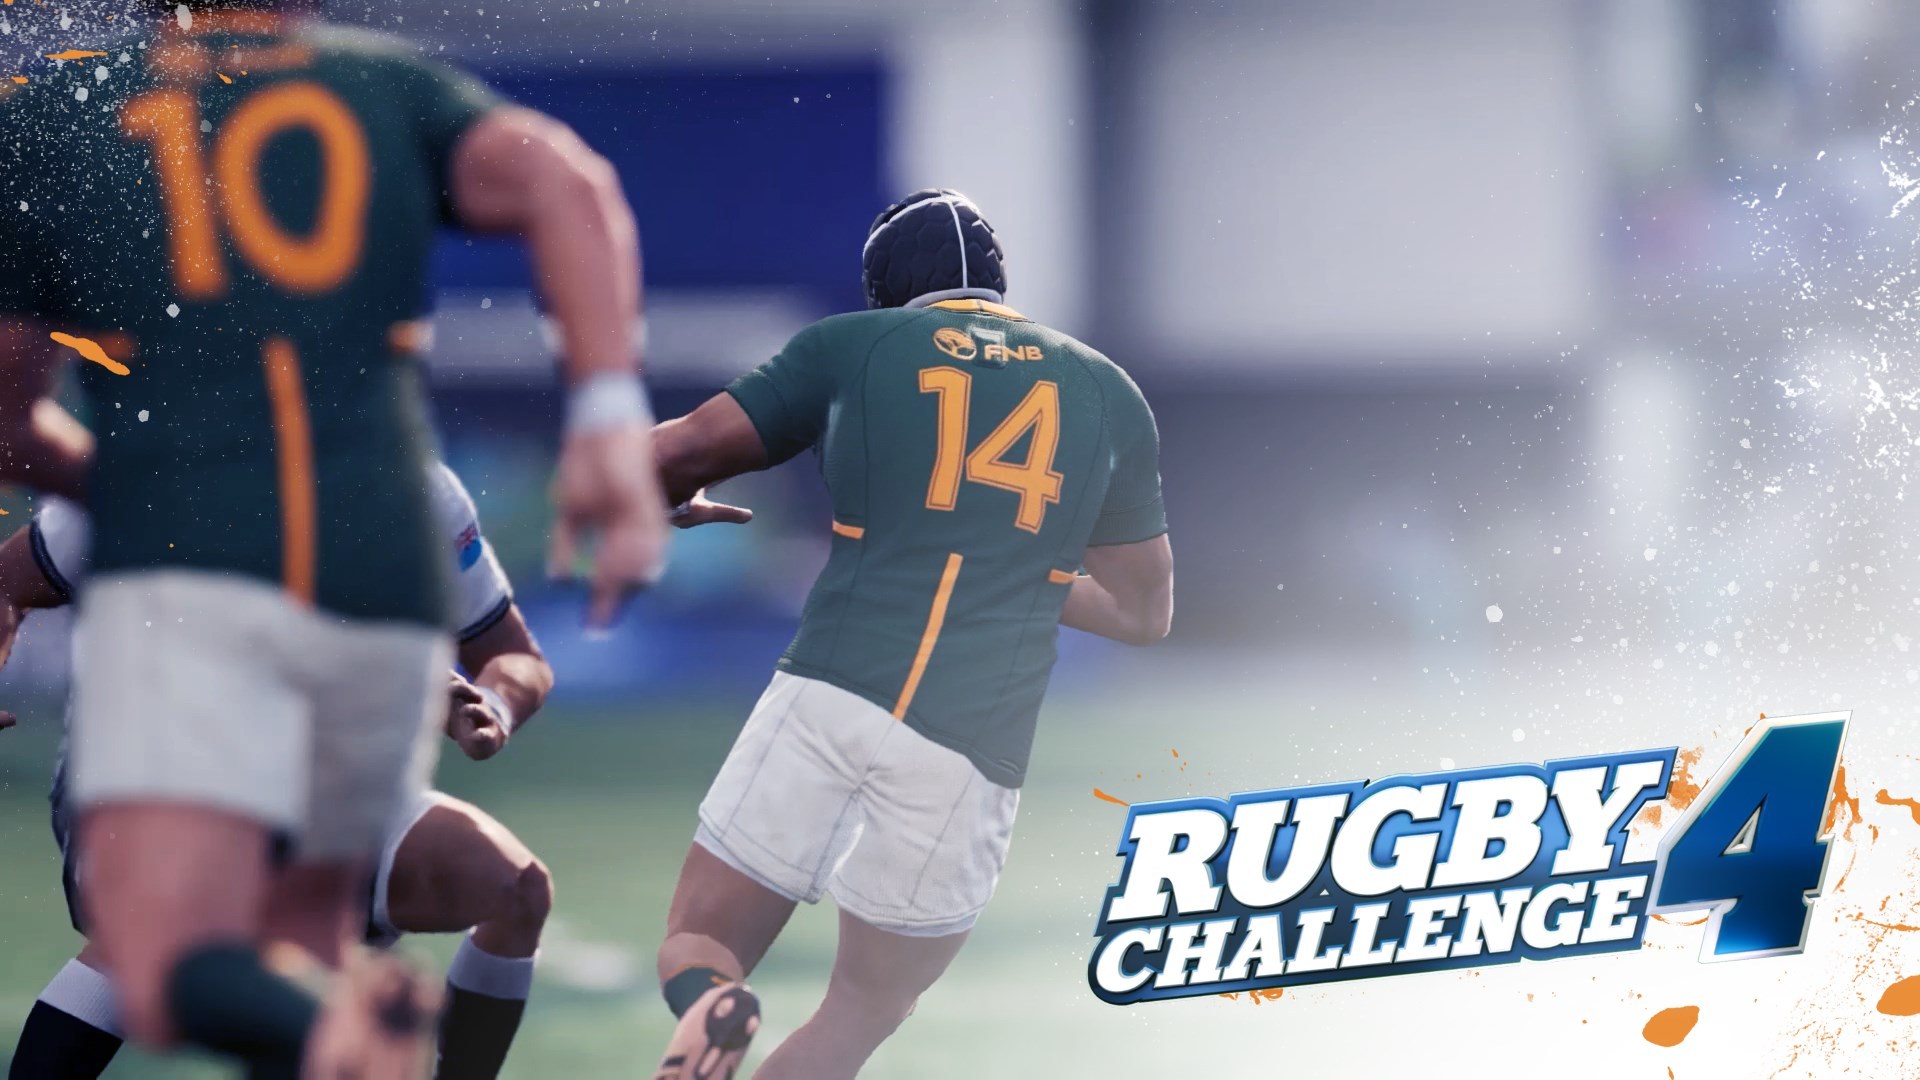 Rugby Challenge 4 Gets A Physical Release Date In Australia and NZ